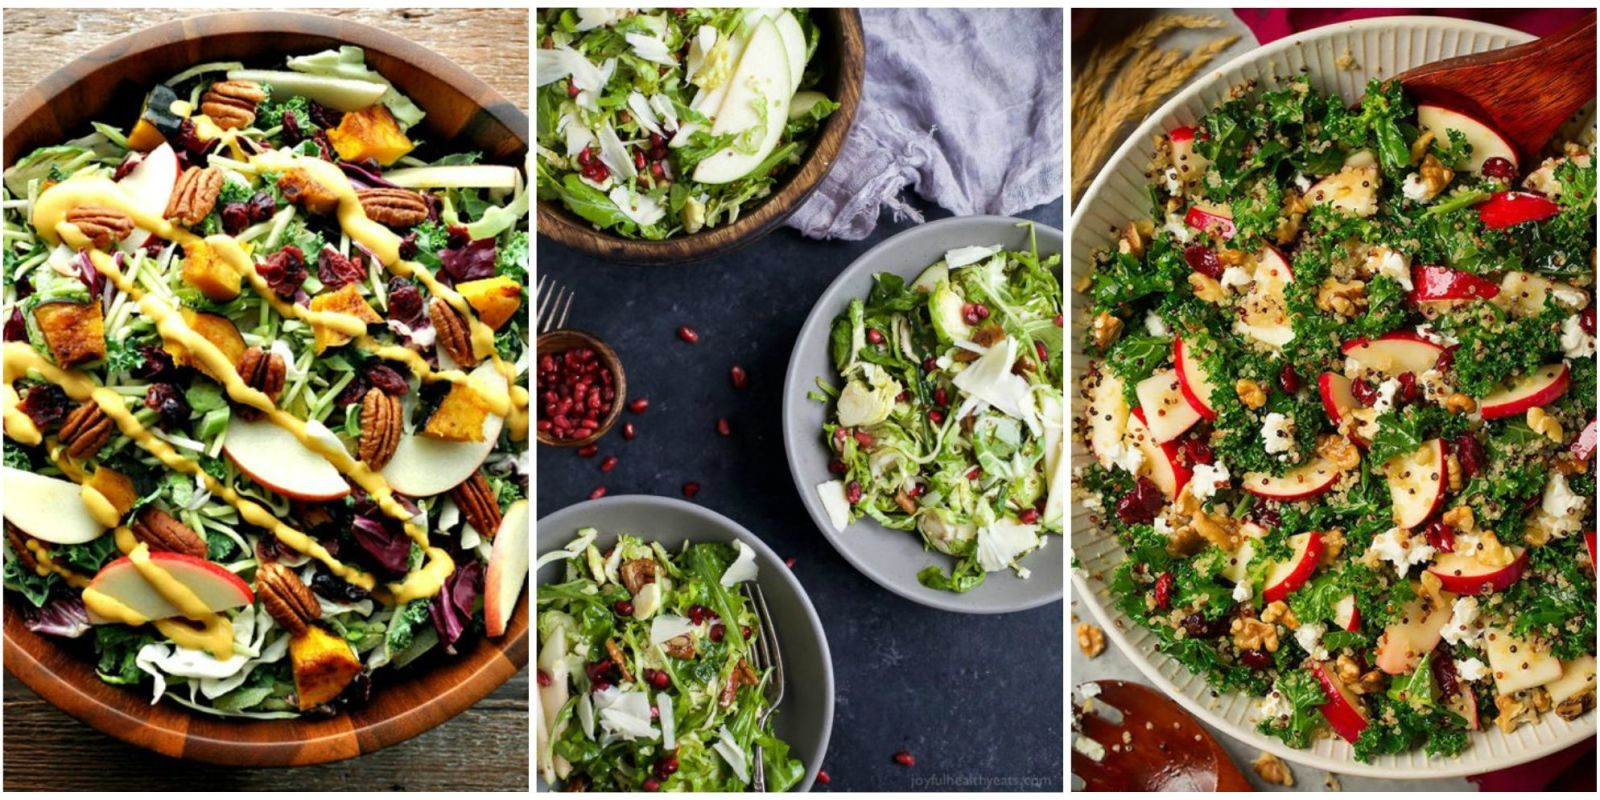 Best Thanksgiving Salads
 11 Easy Thanksgiving Salad Recipes Best Side Salads for